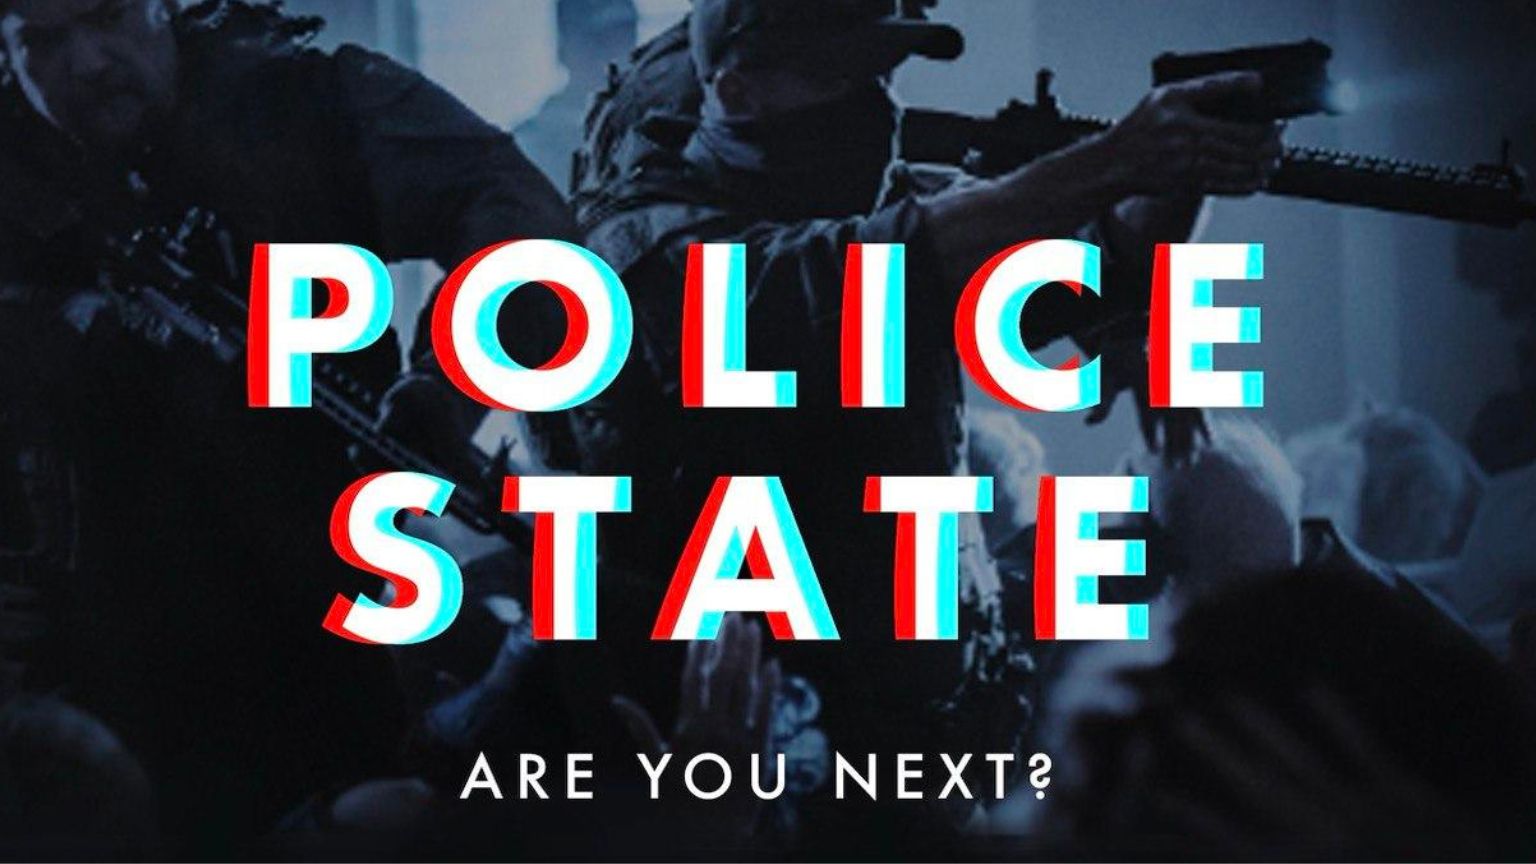 Civil Liberties Documentary “Police State” Impresses in Ticket Sales